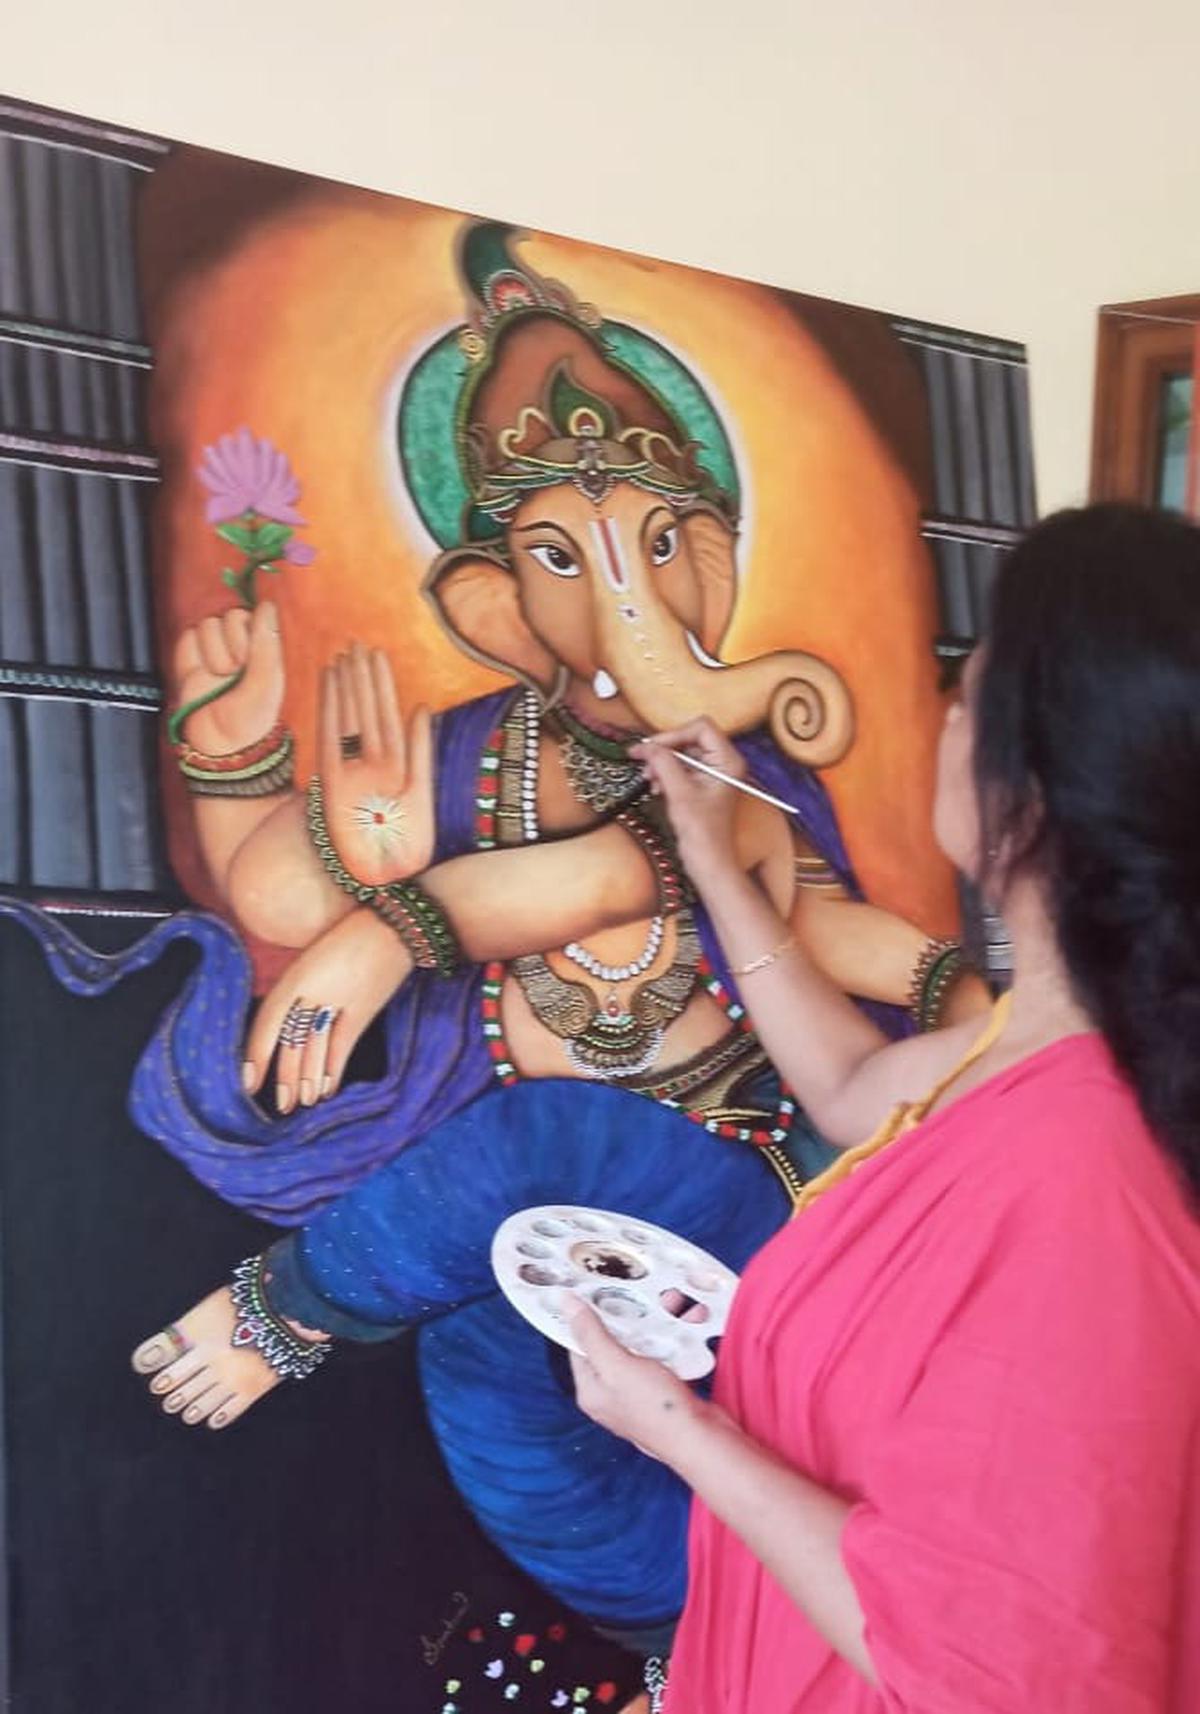 Spandana giving final touches to a Ganesha painting